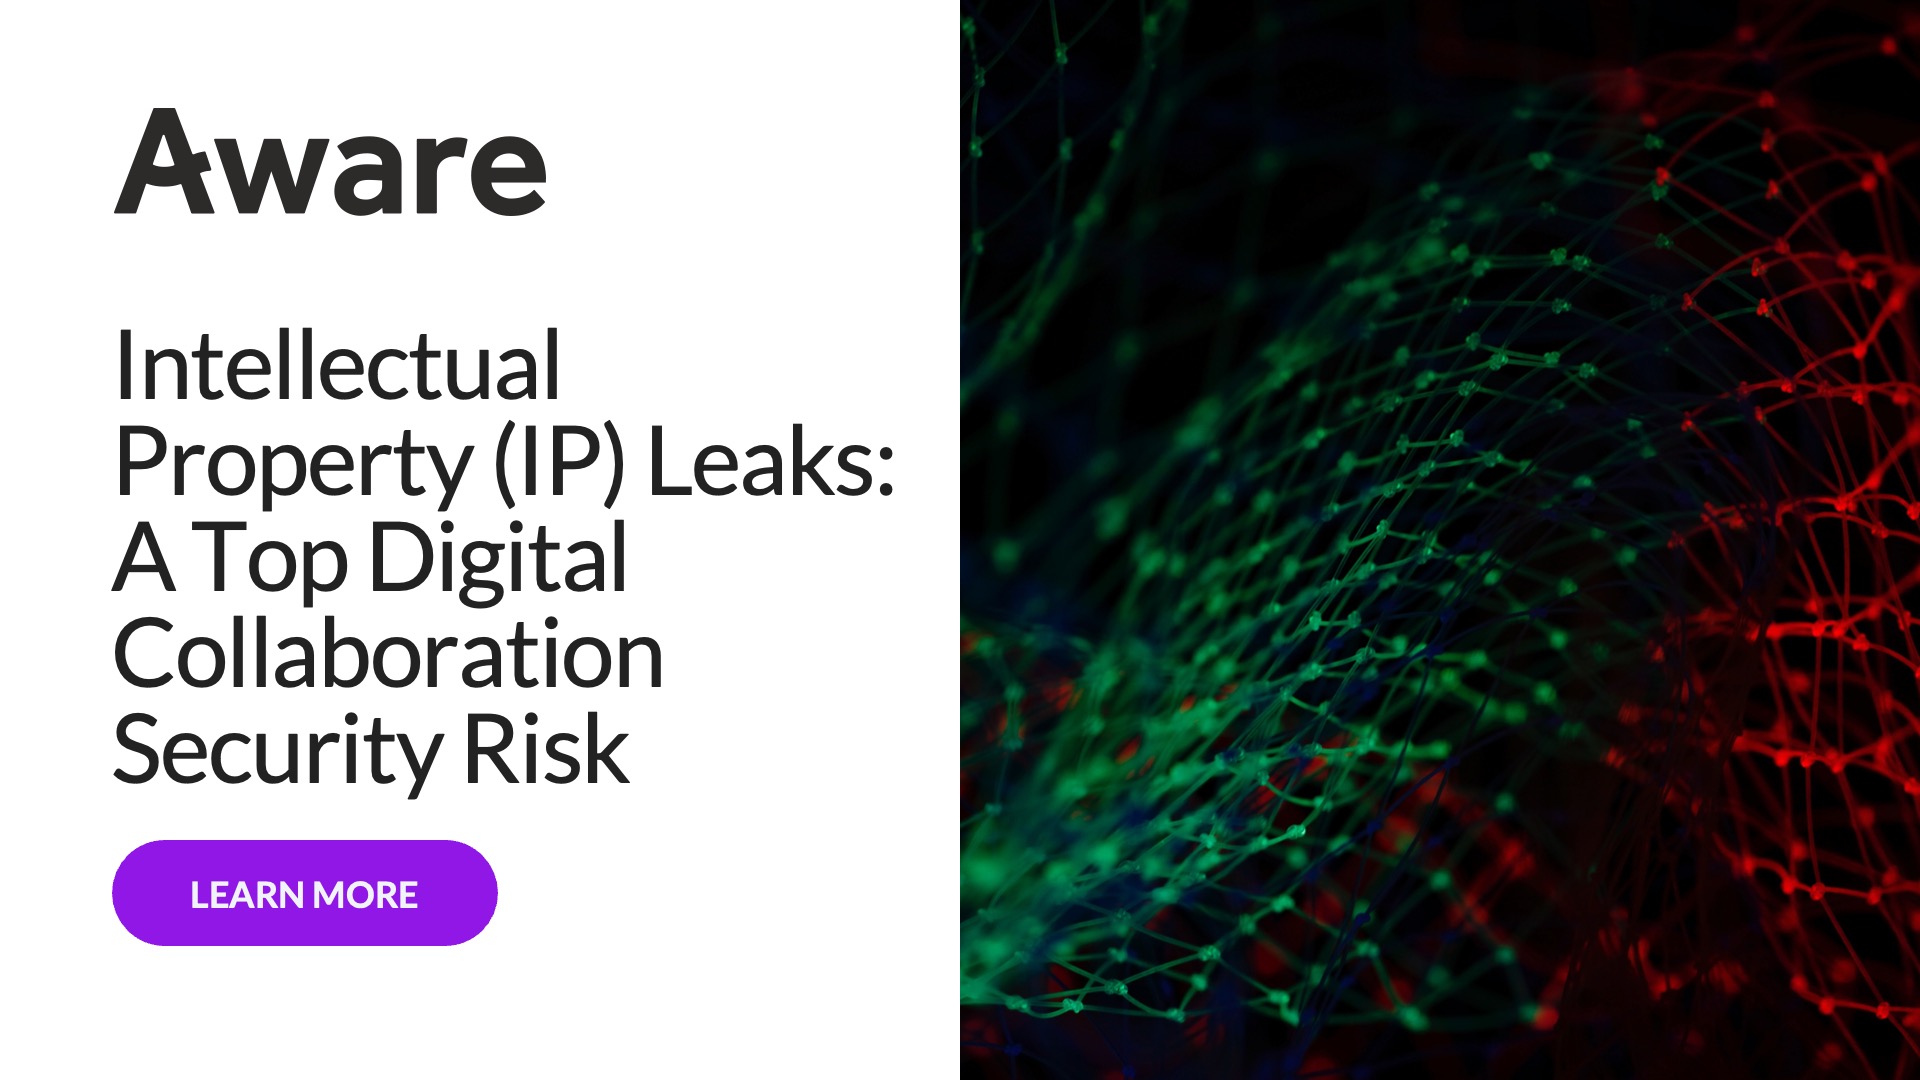 Intellectual Property (IP) Leaks: A Top Digital Collaboration Security Risk